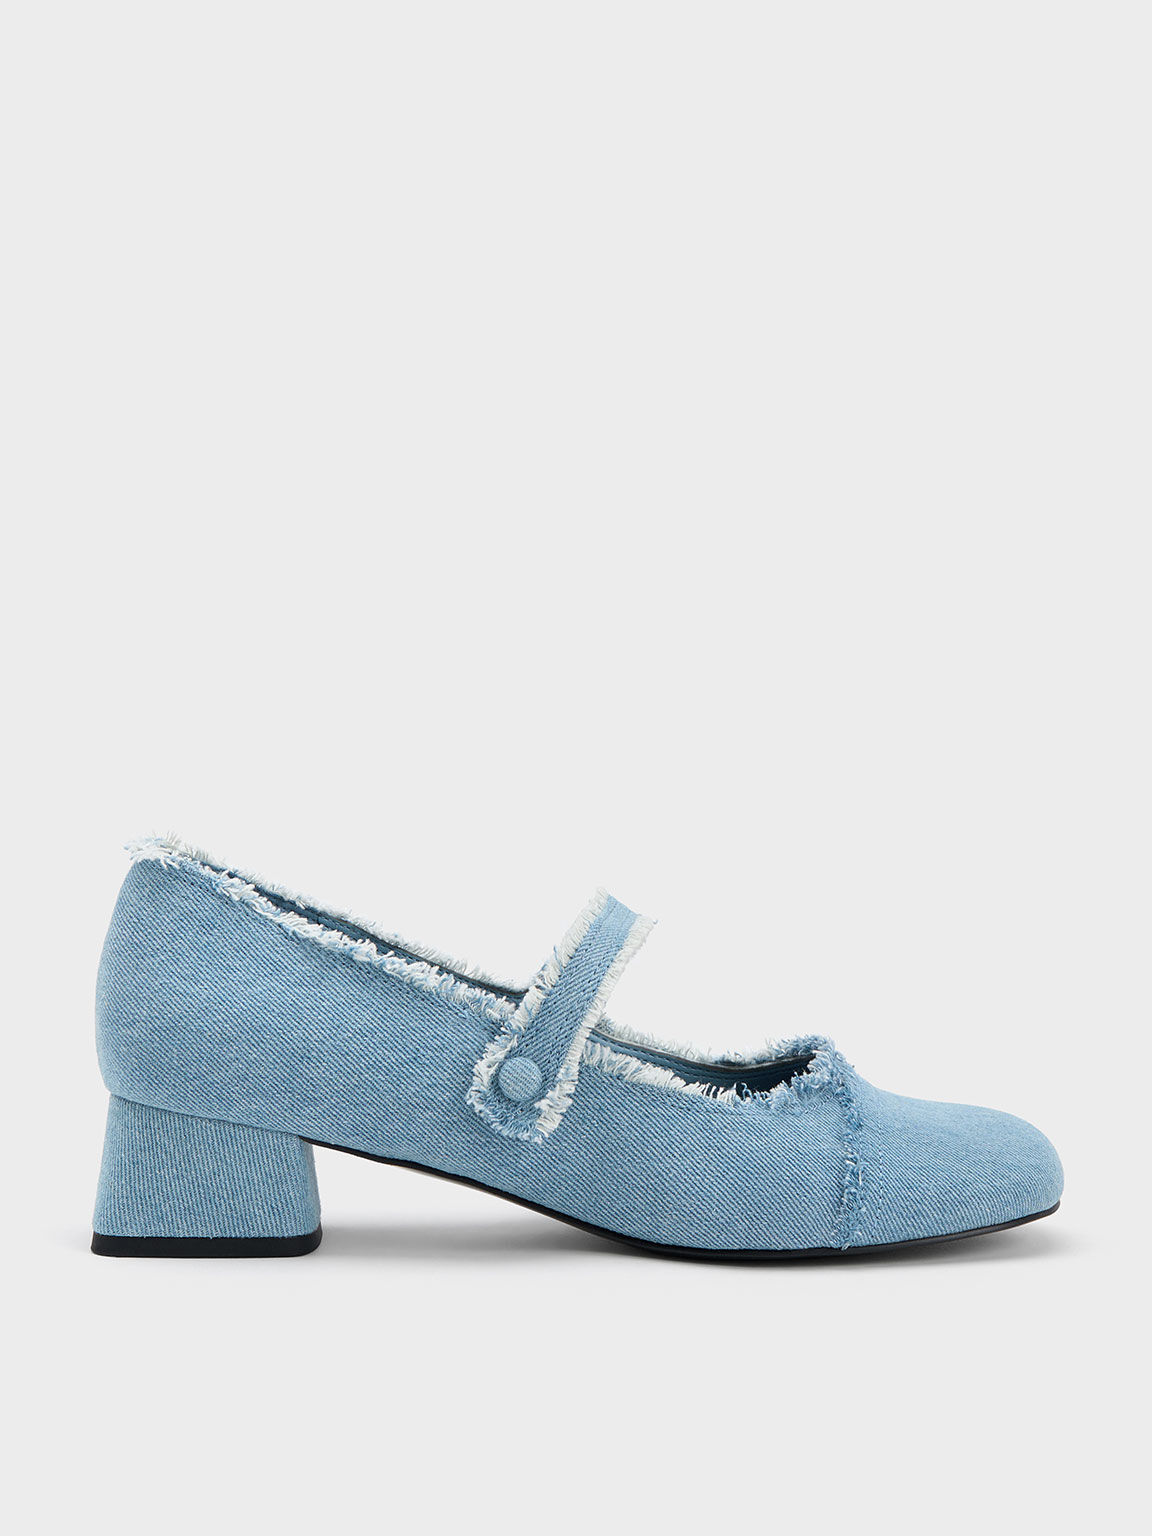 Charles & Keith Chunky Mary Janes in Light Blue